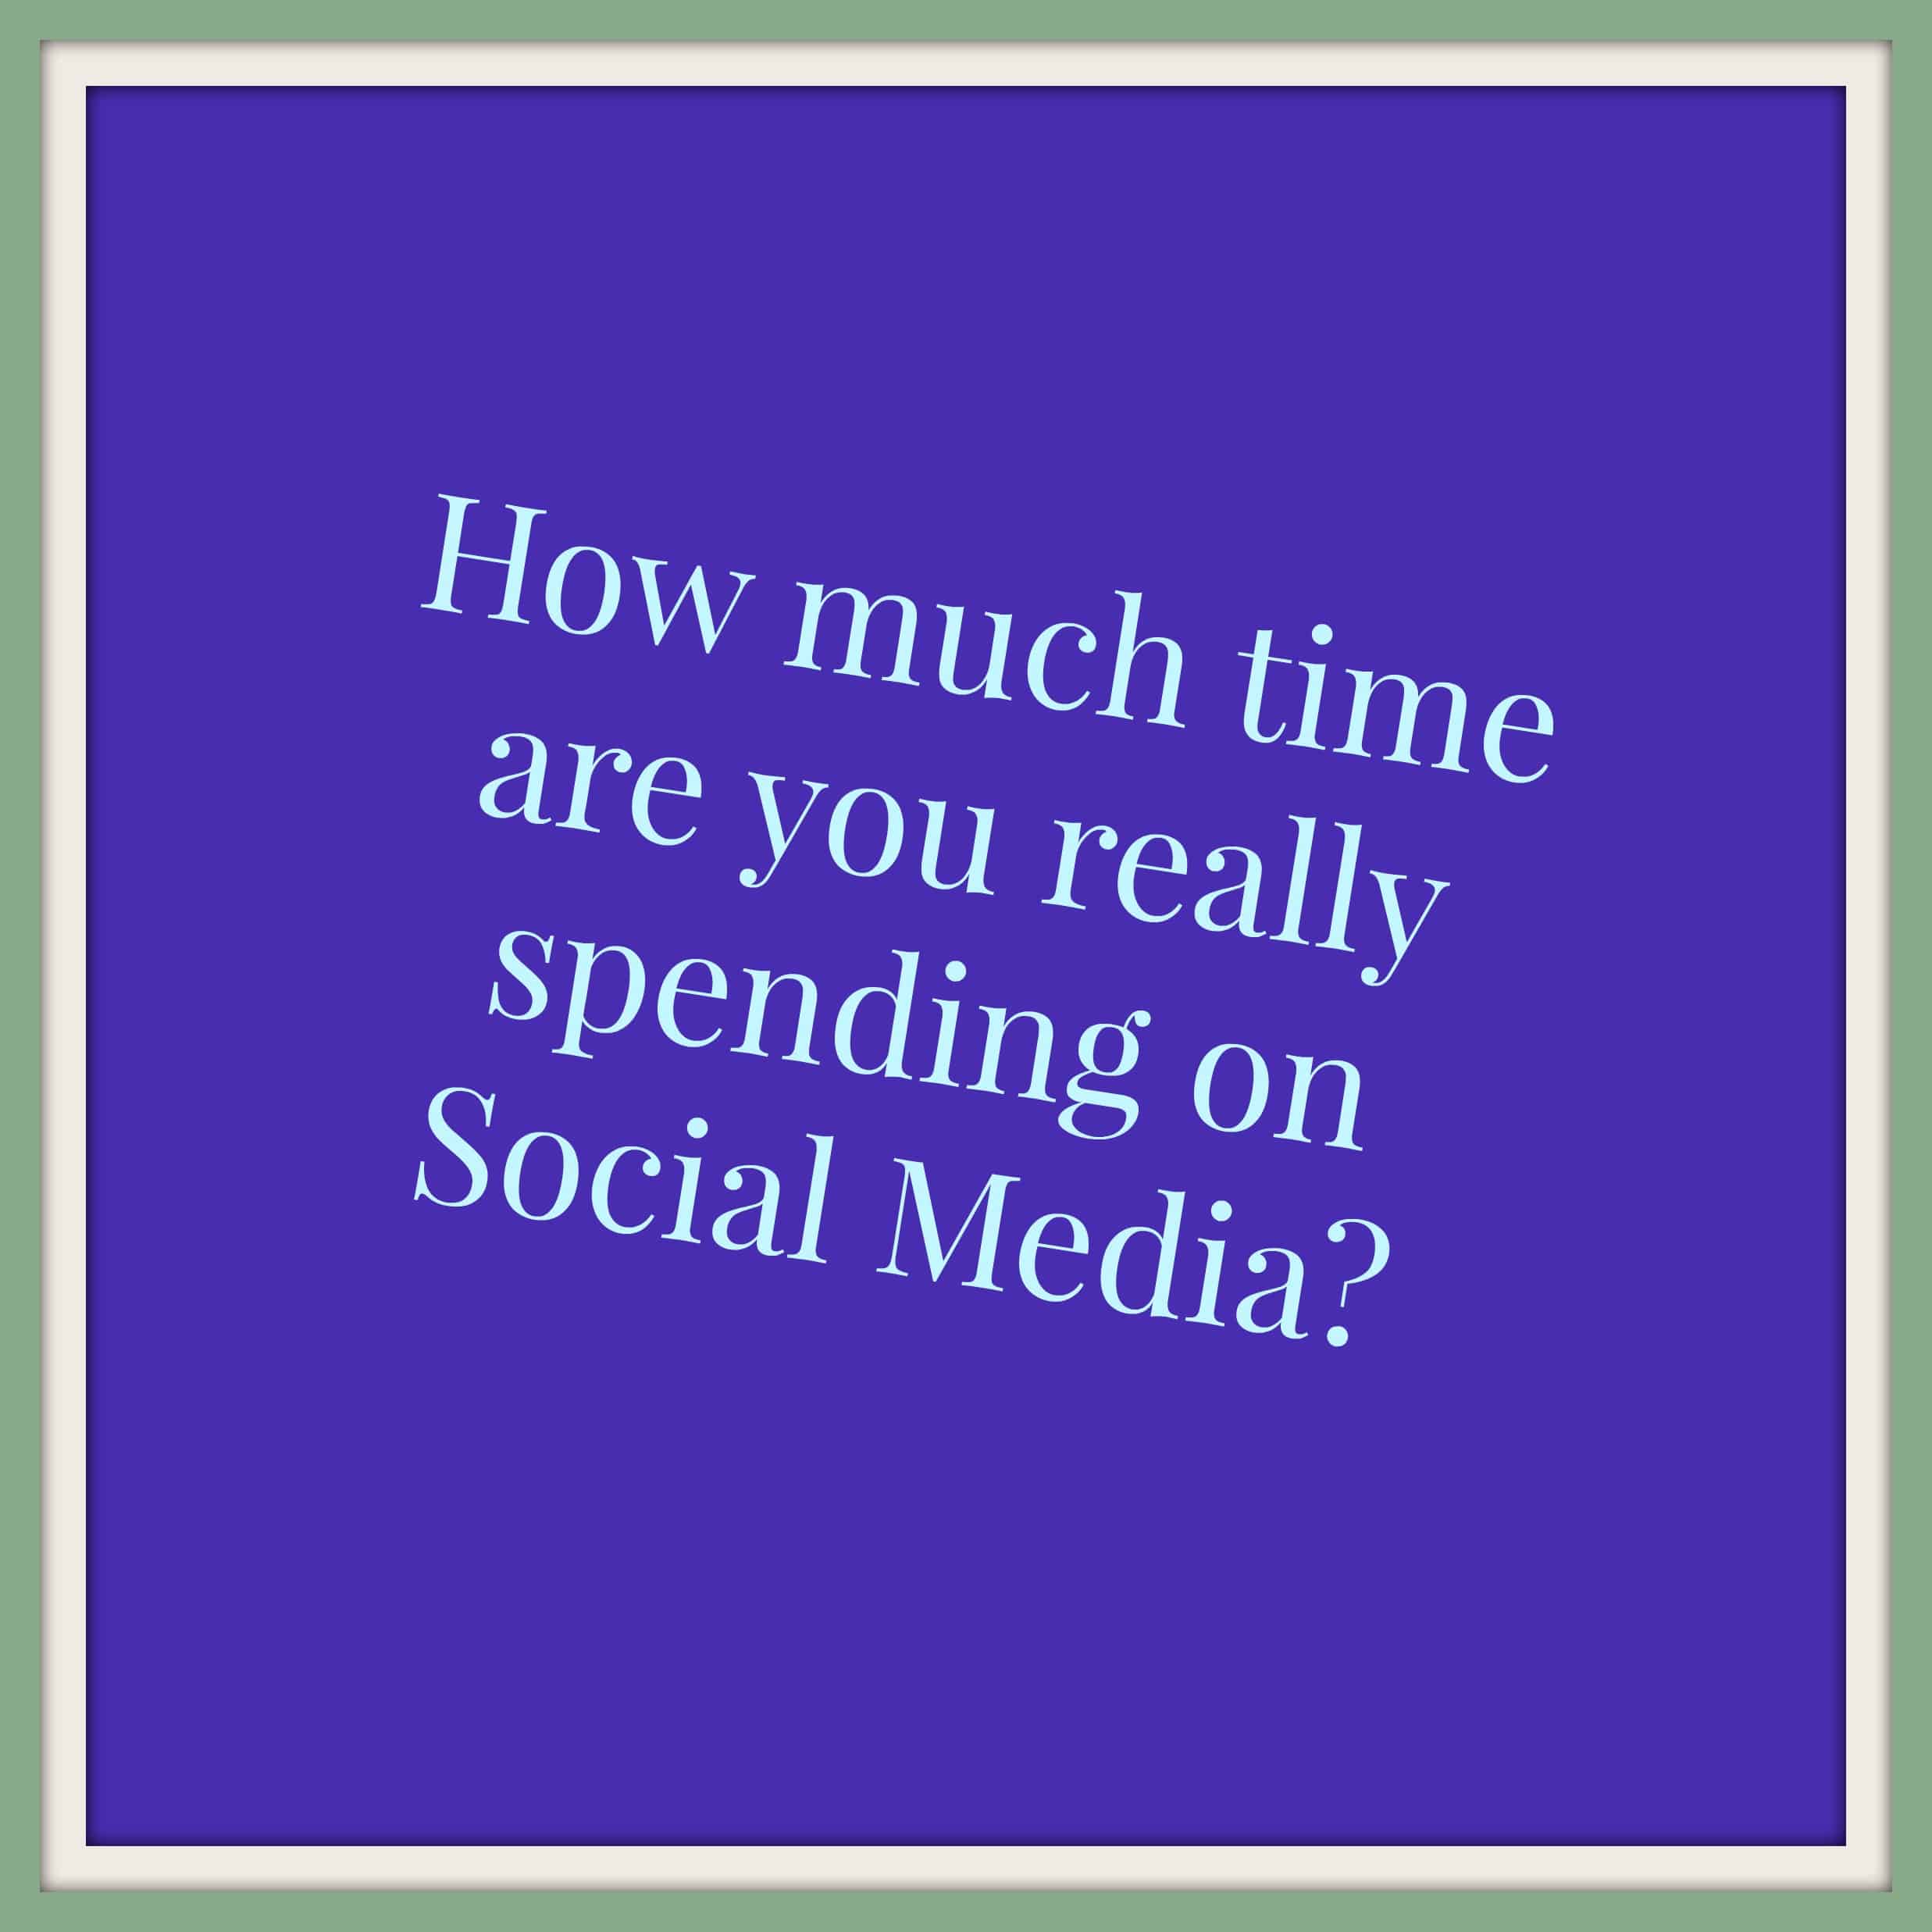 How much time are you spending on social media/